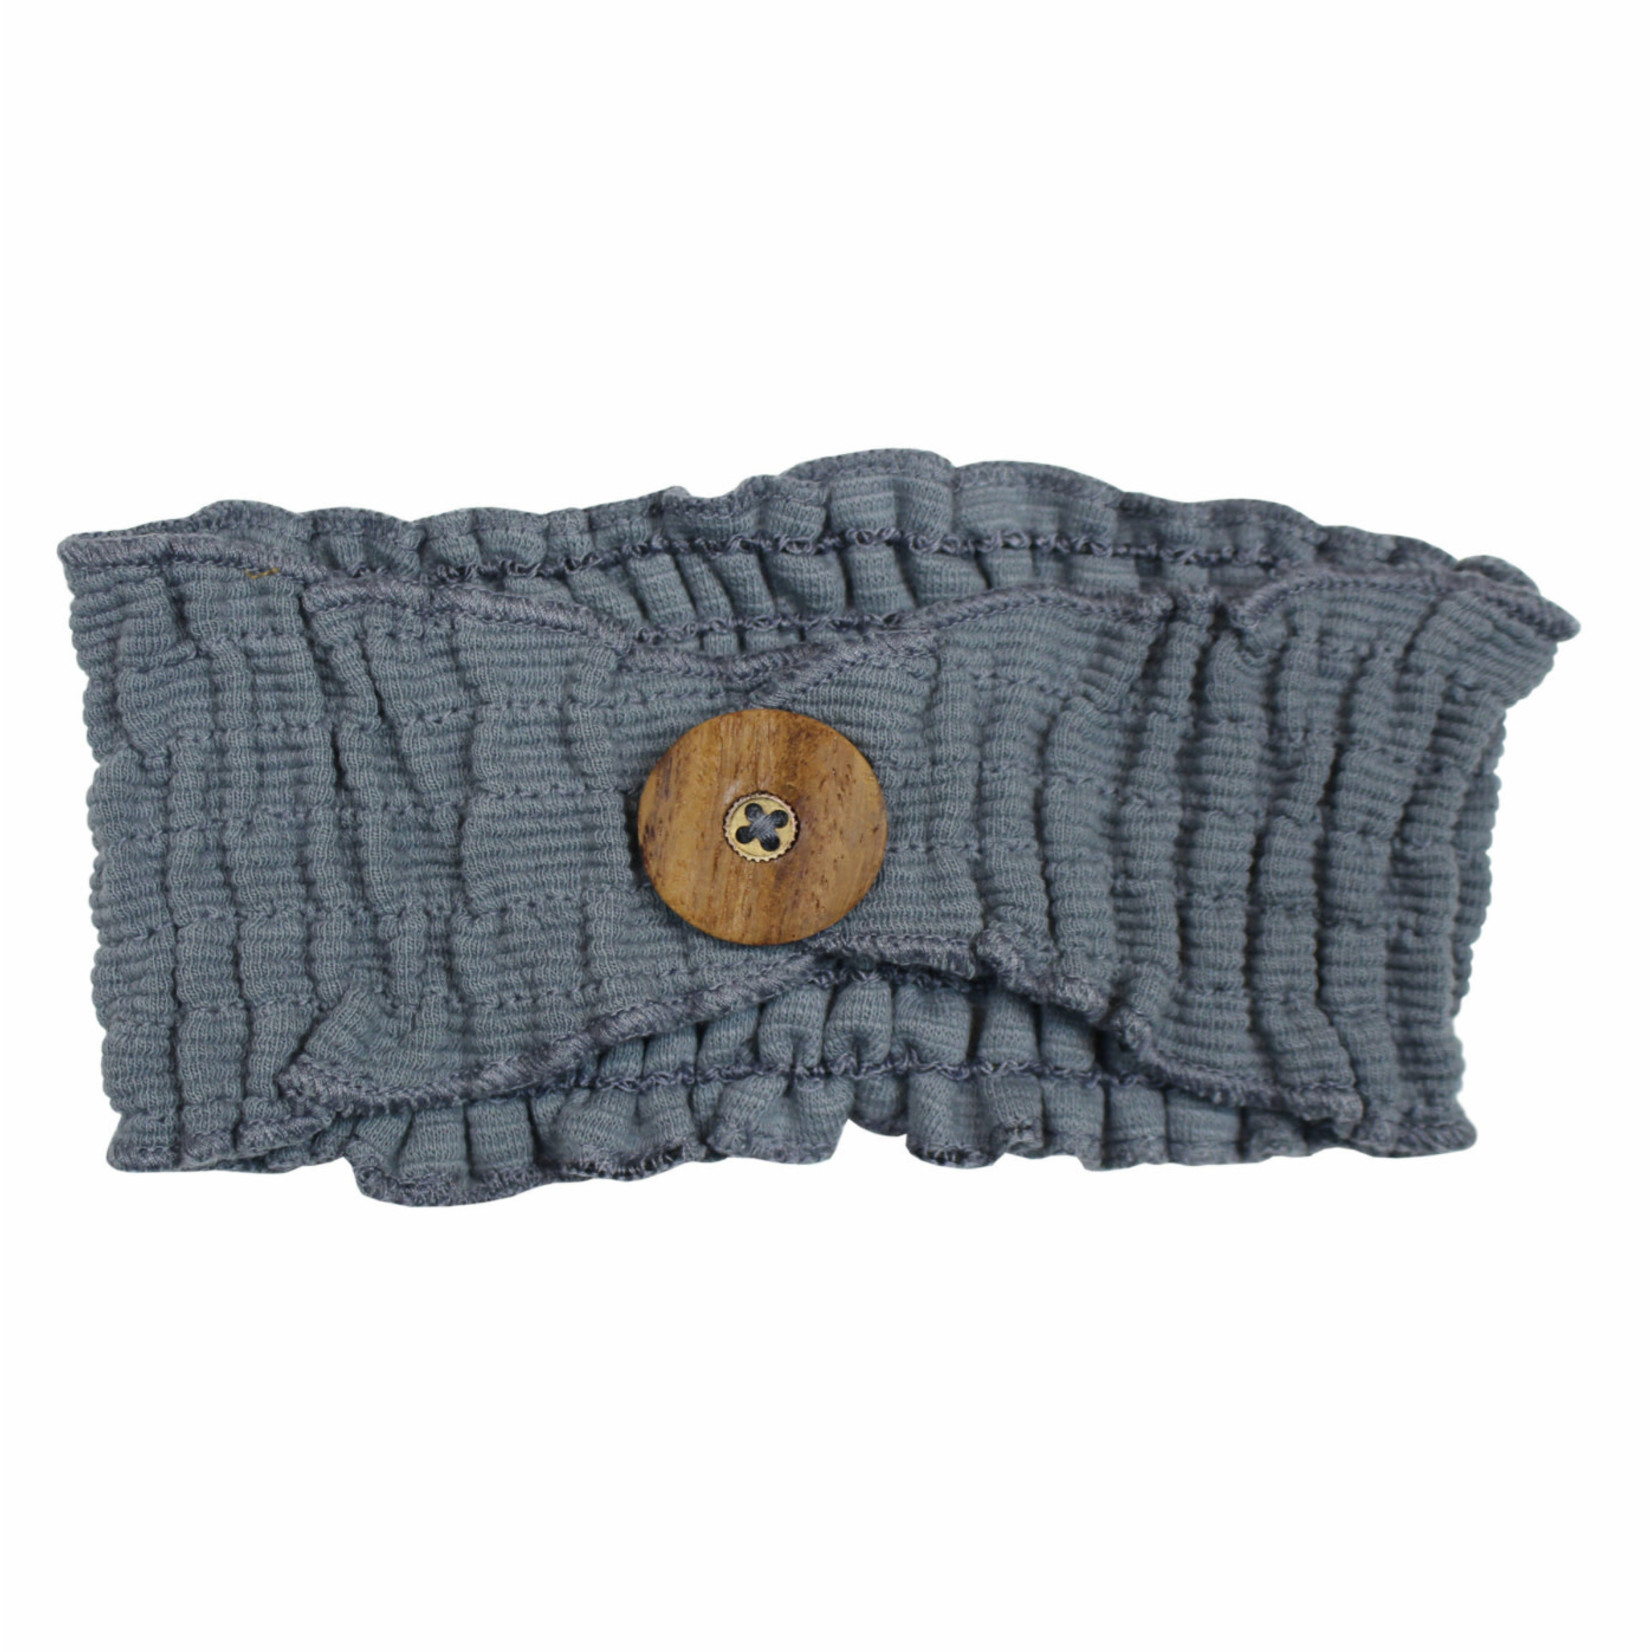 L’oved Baby L'oved Baby - Corduroy Headband